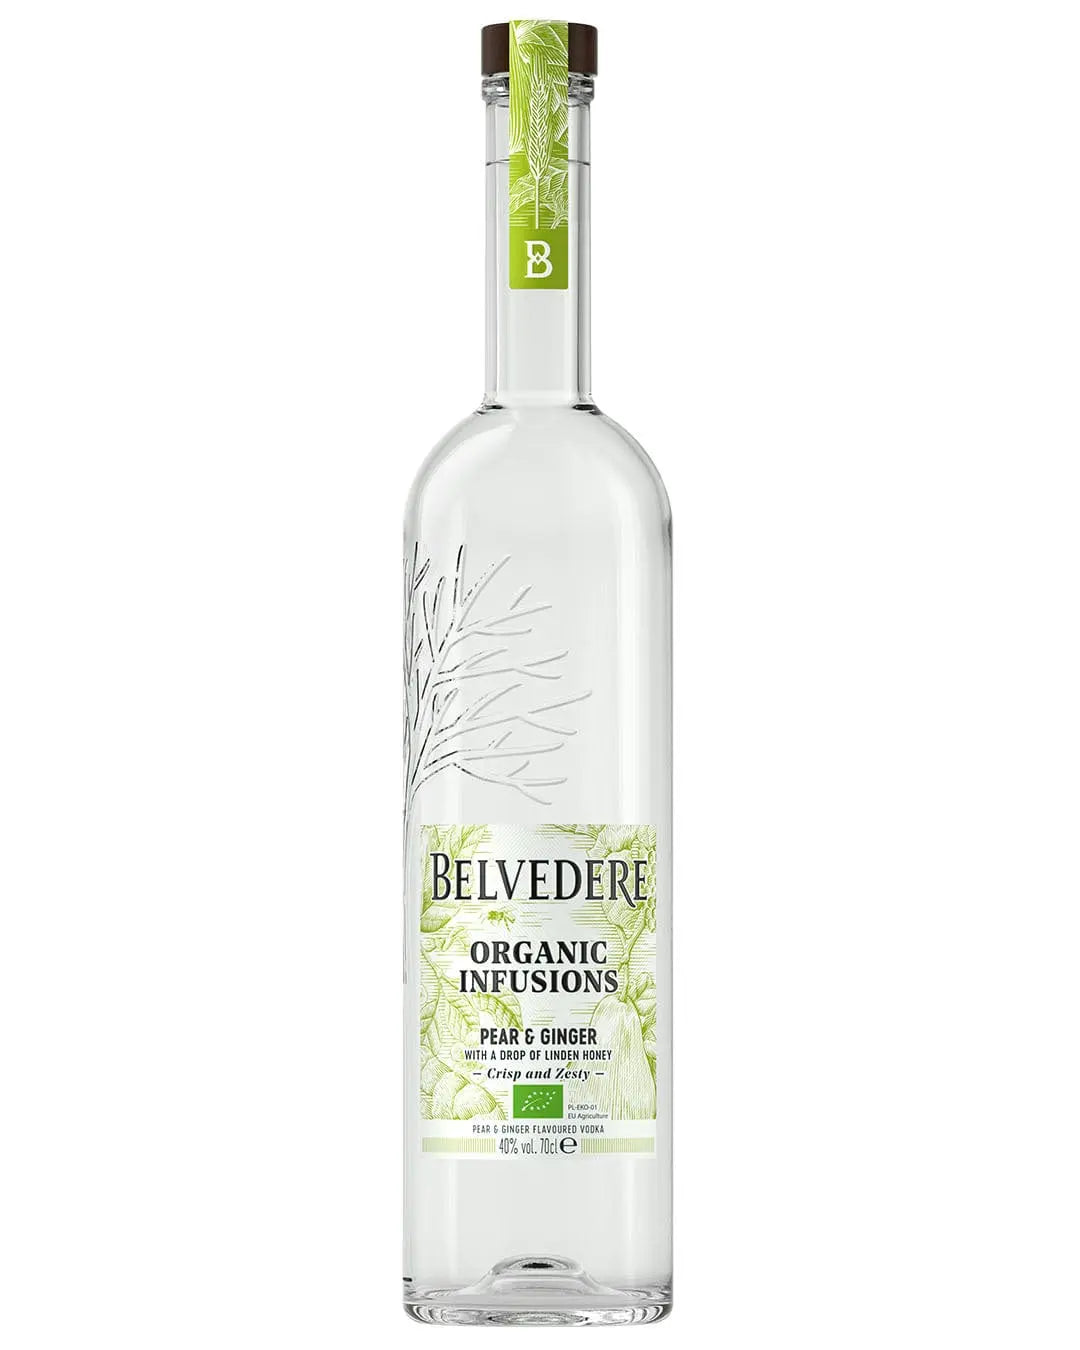 Belvedere Organic Infusions Pear & Ginger Vodka, 70 cl Vodka